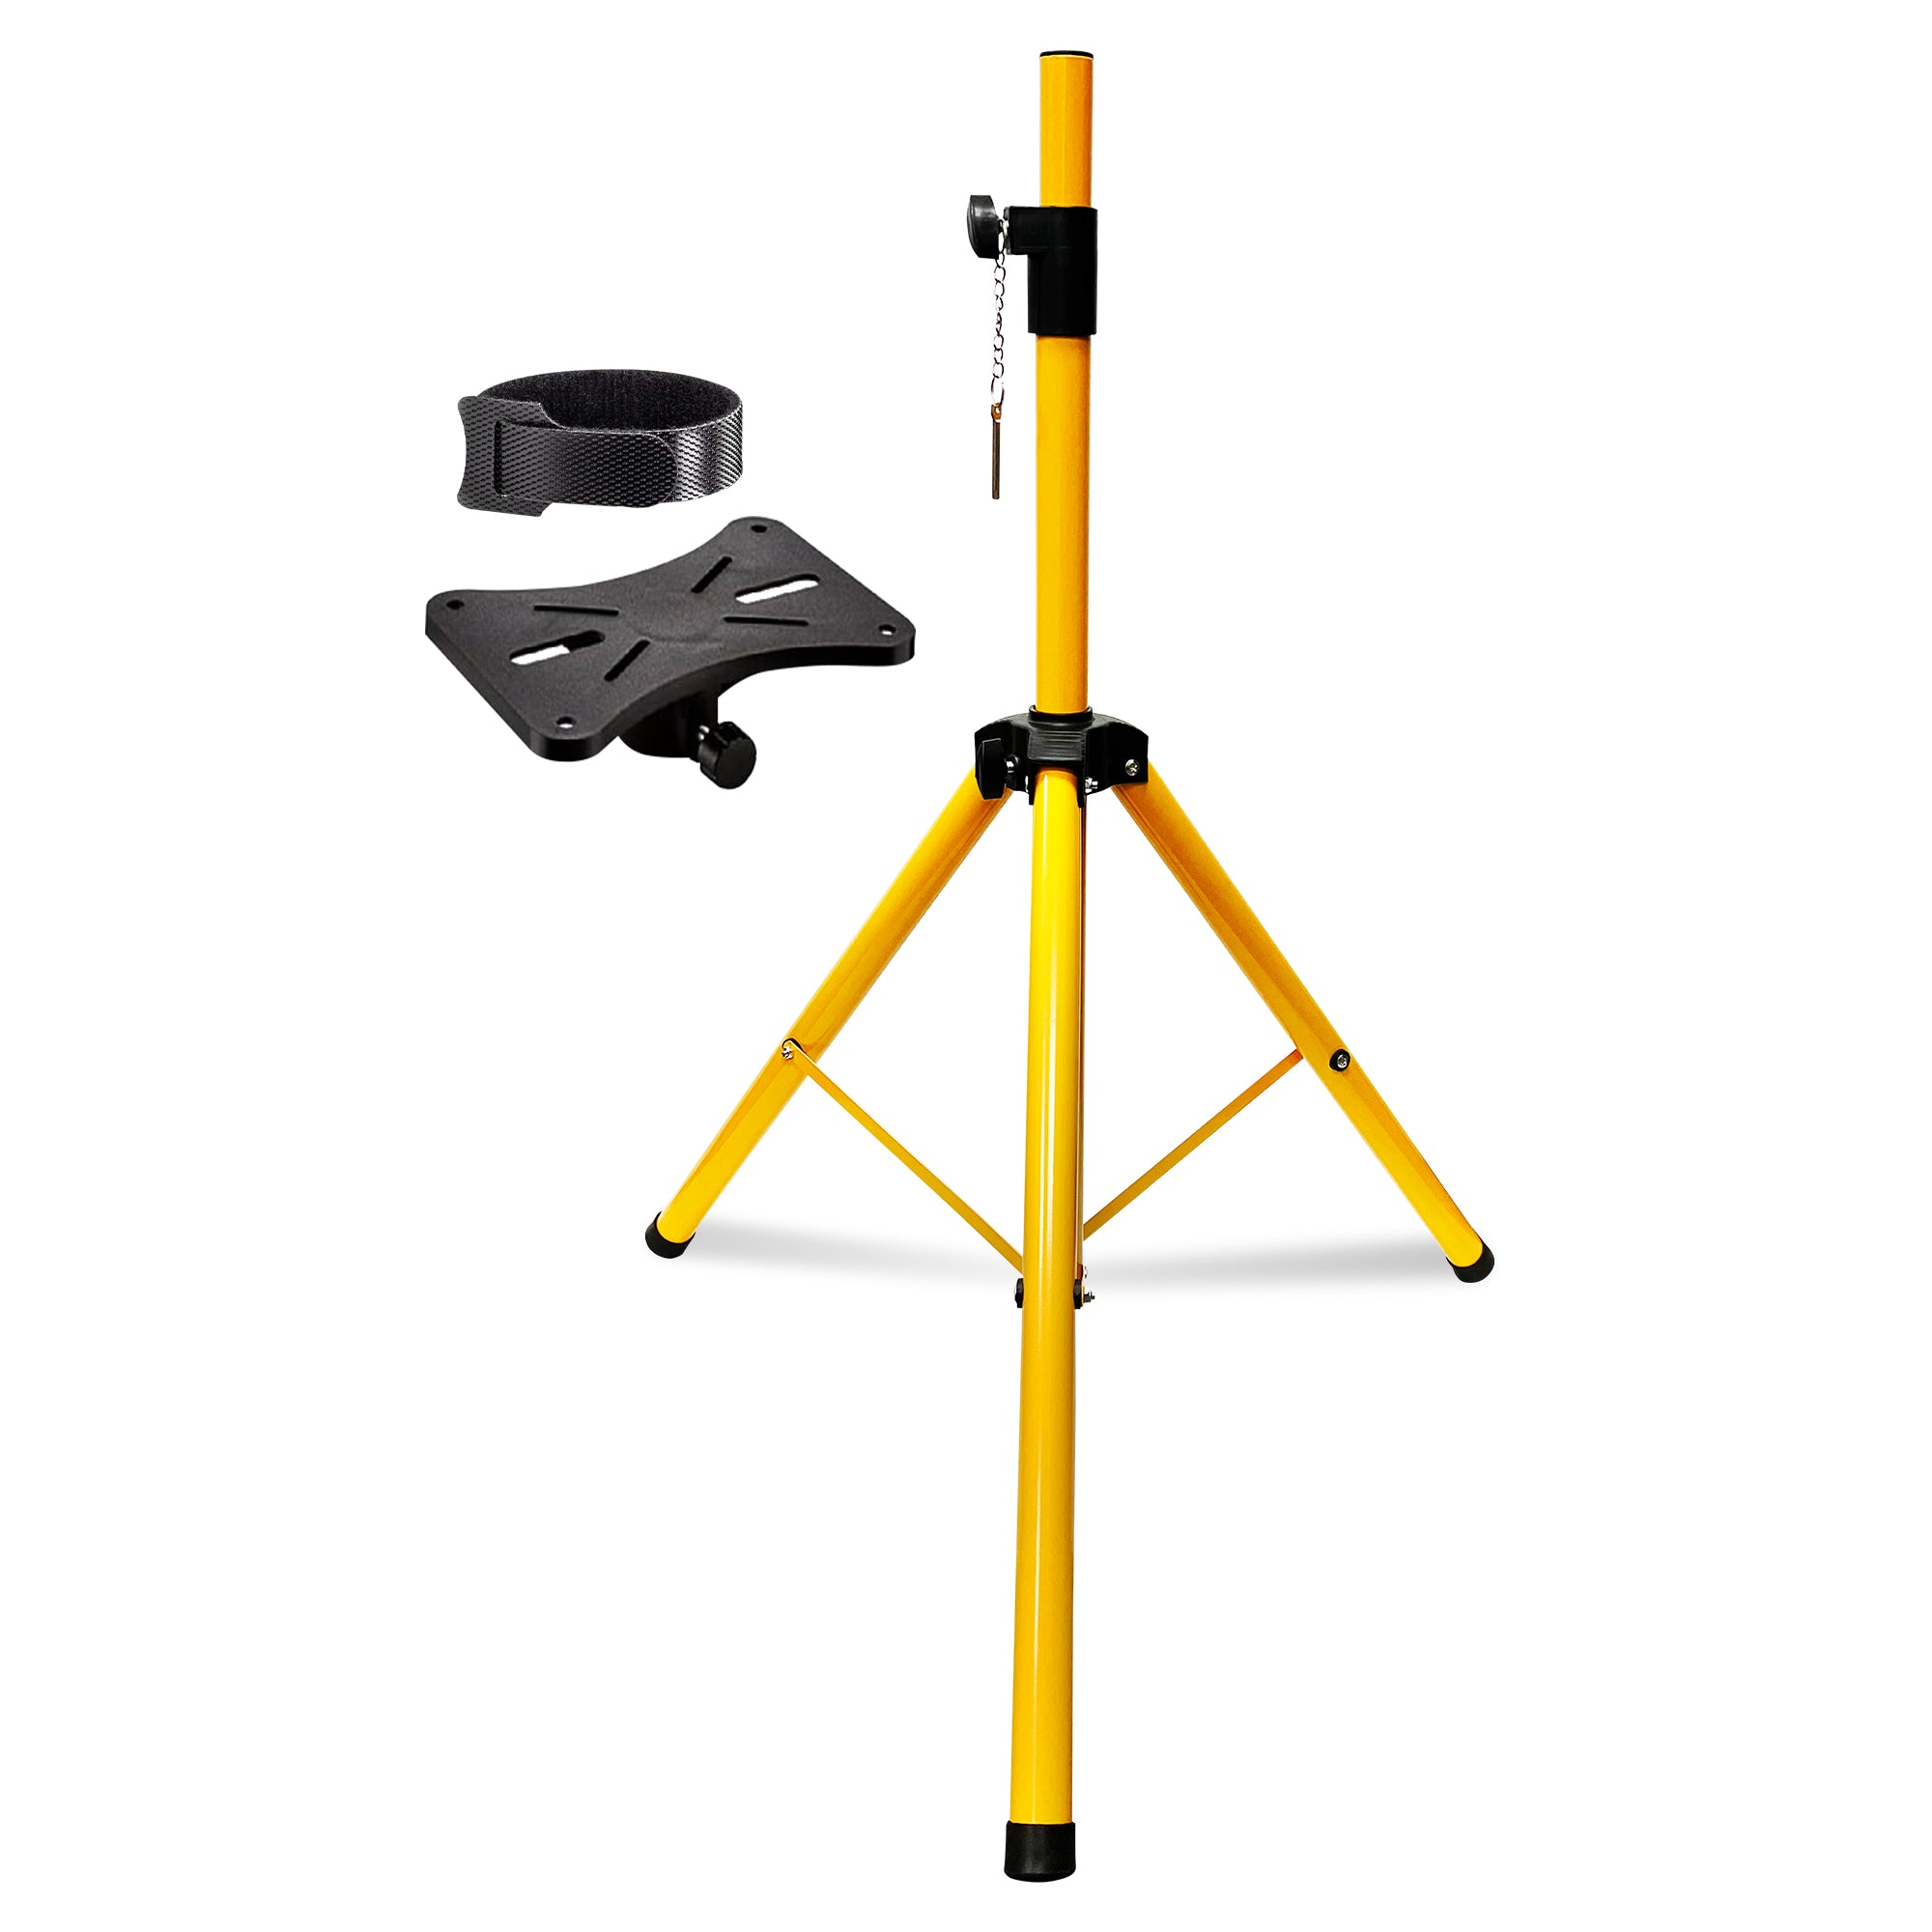 5 Core Universal Speaker Stand Yellow w Mount Bracket • Height Adjustable Tripod Stands 100 lbs Capacity